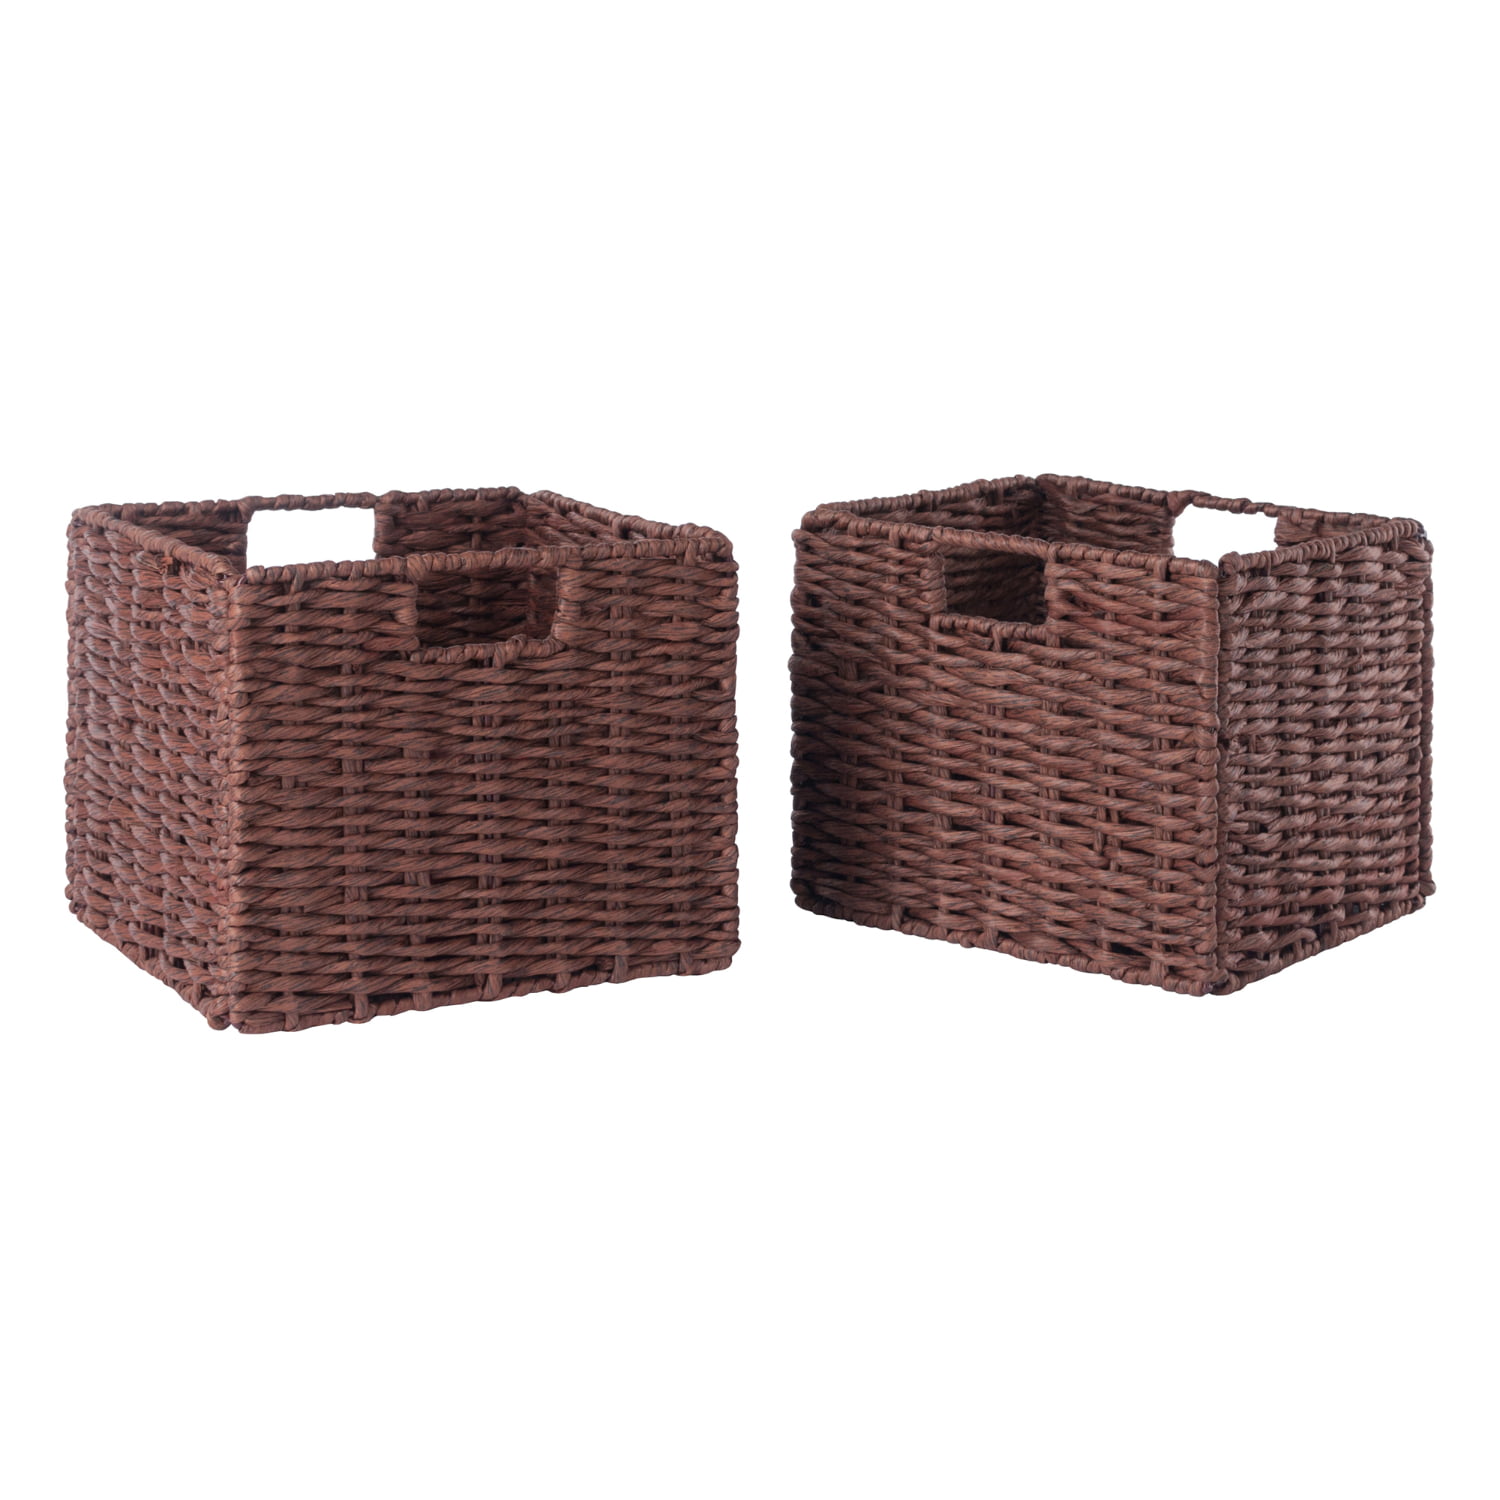 Details about   NEW Rattan 3 Tier Hanging Basket by Drew Barrymore Flower Home Best Seller 